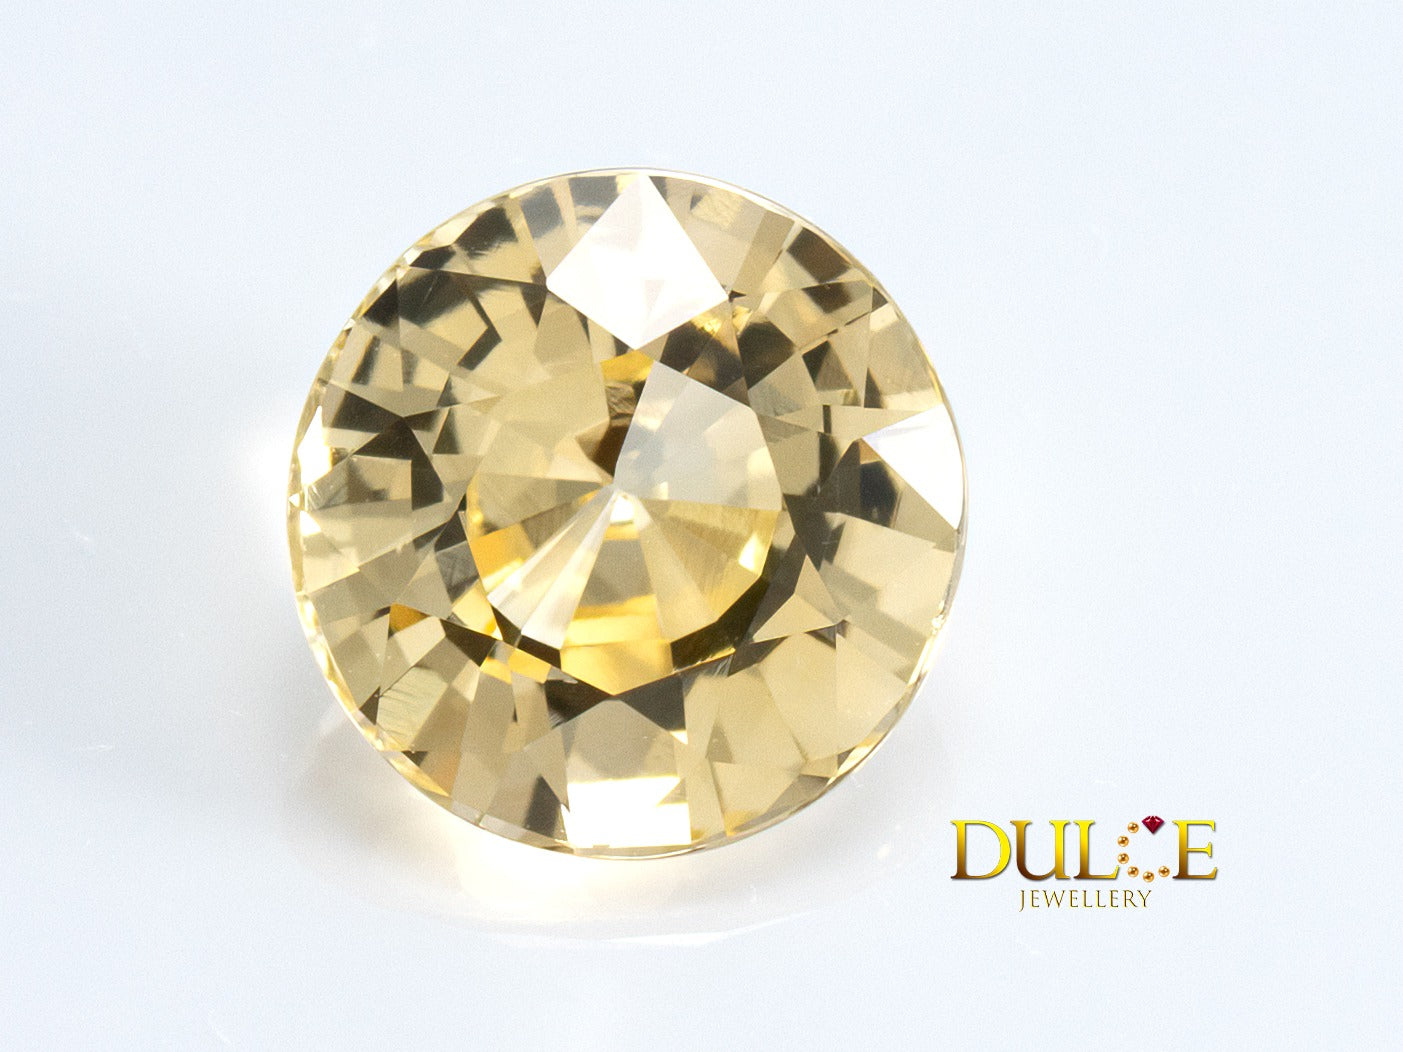 Yellow Sapphire (Price by Request)